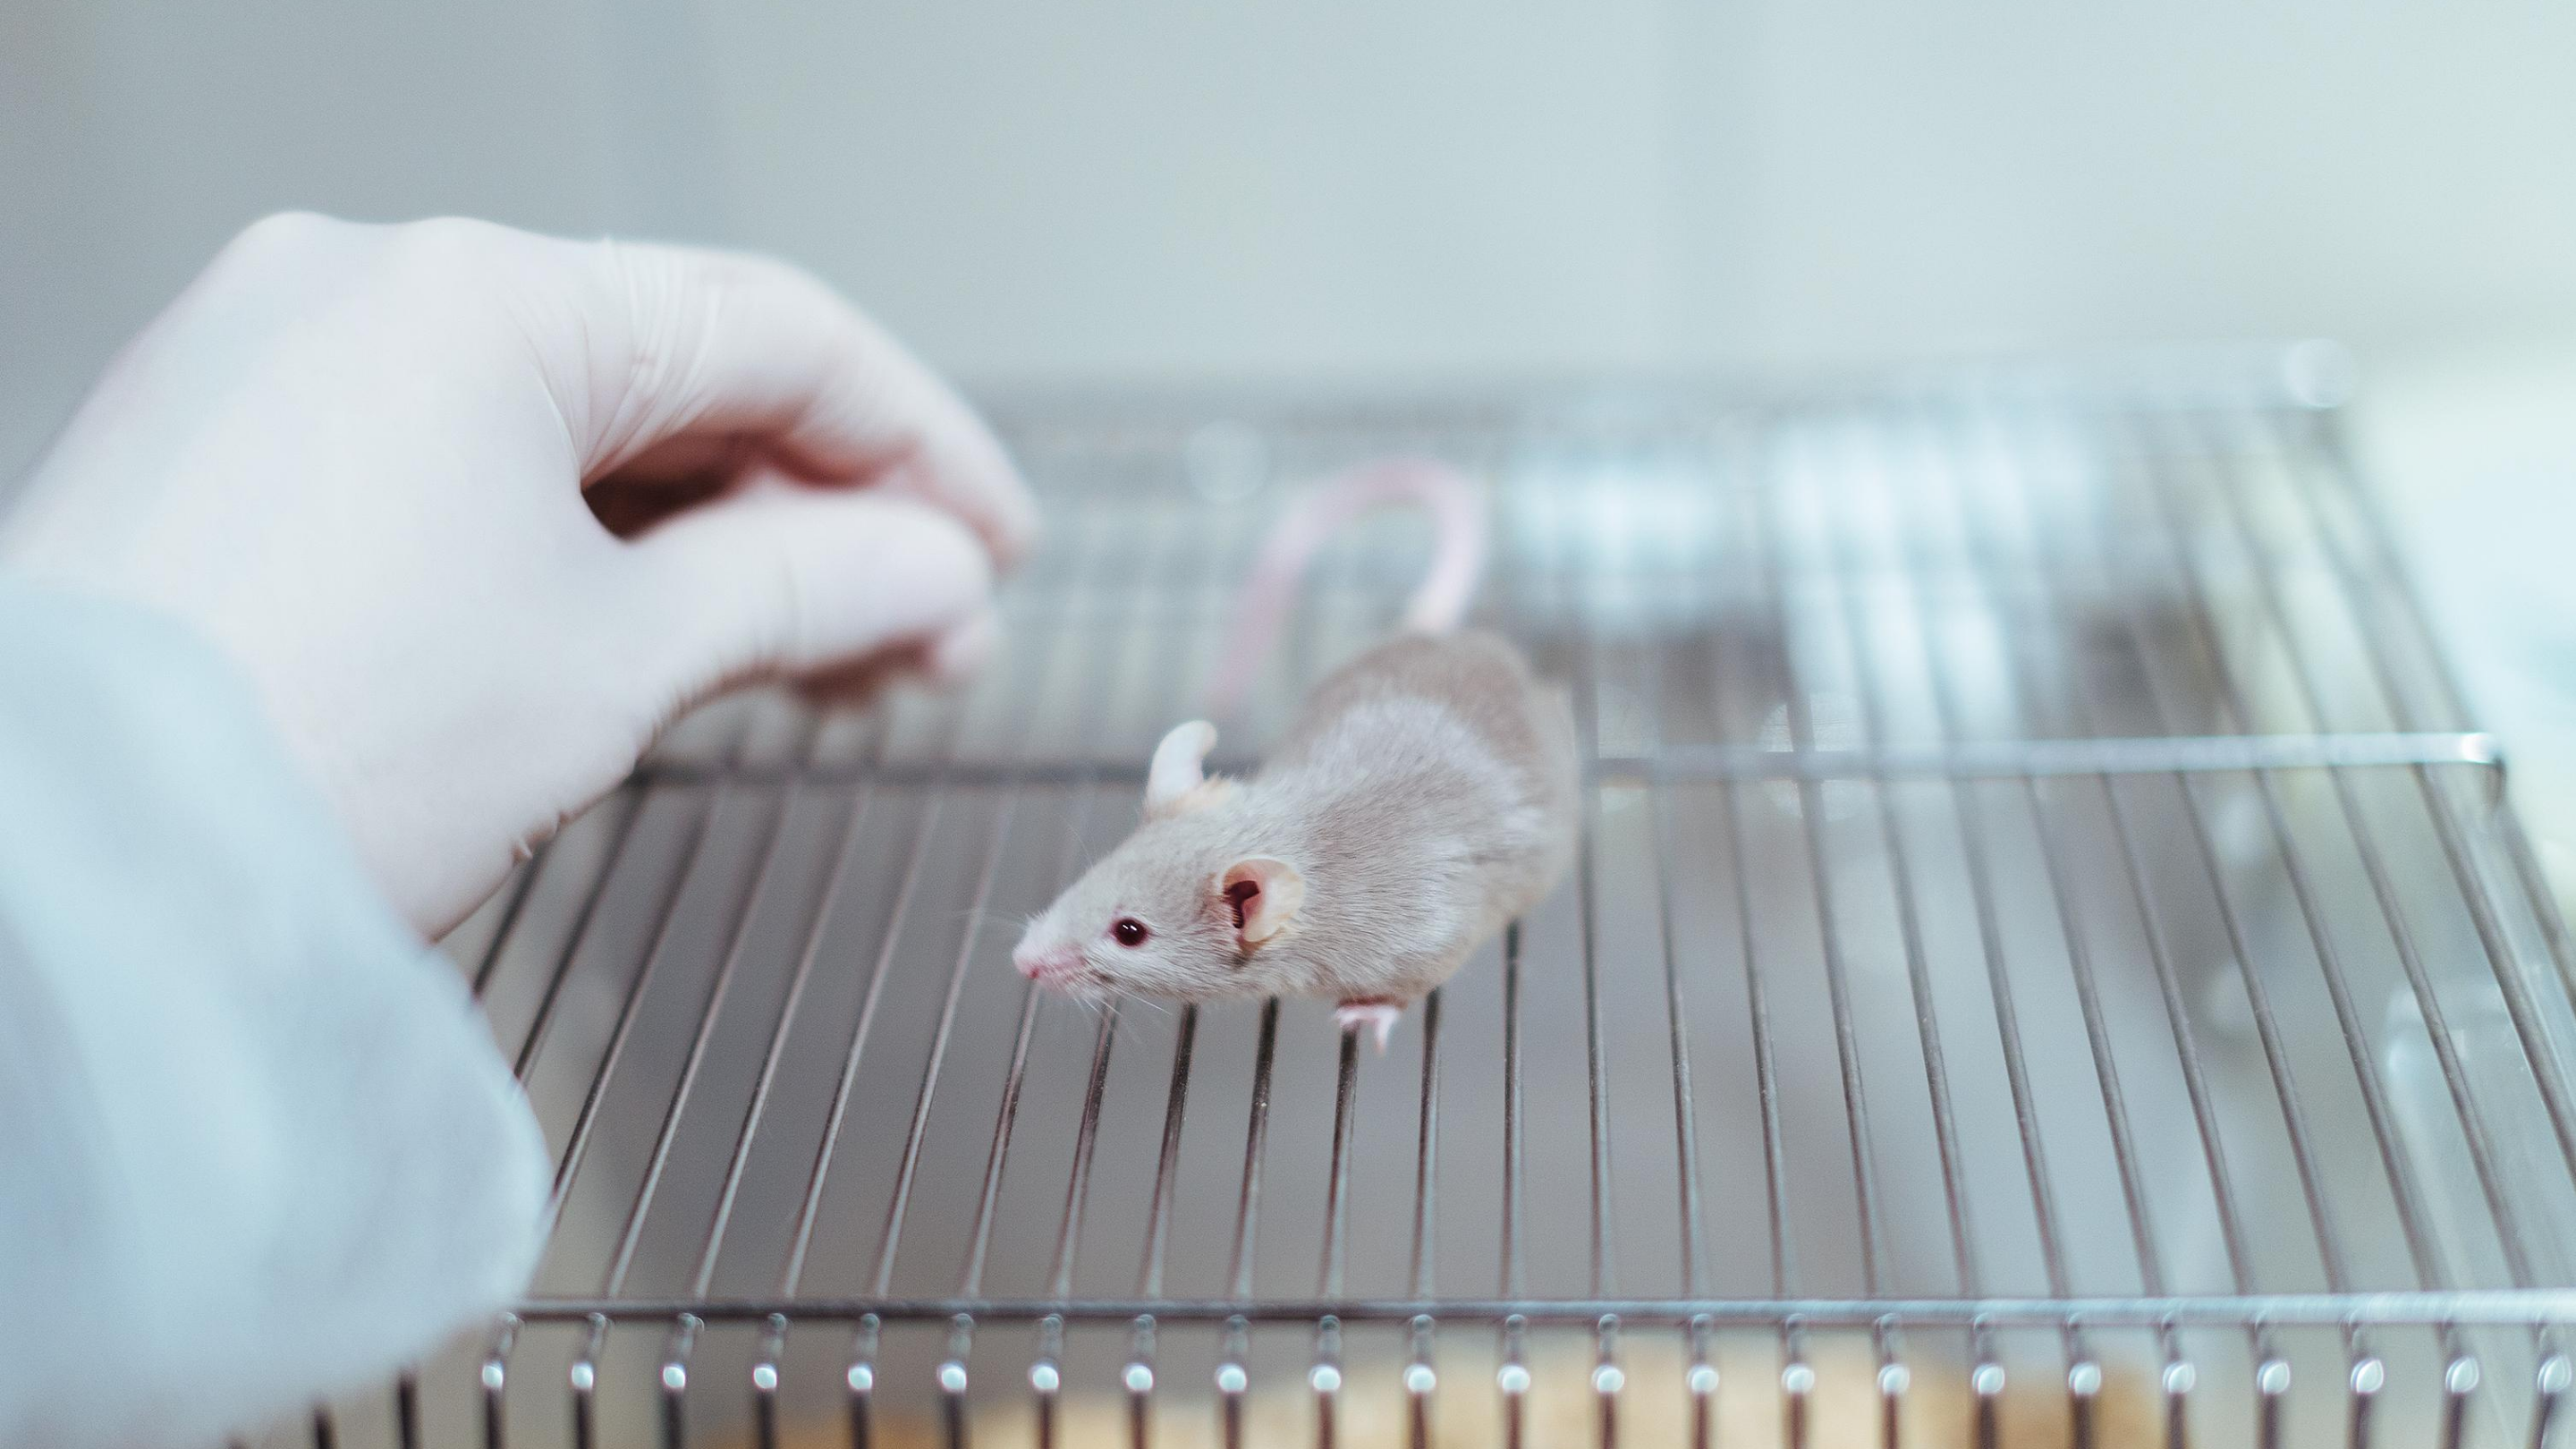 A medical-gloved hand reaches toward a timid mouse perched atop a metal cage